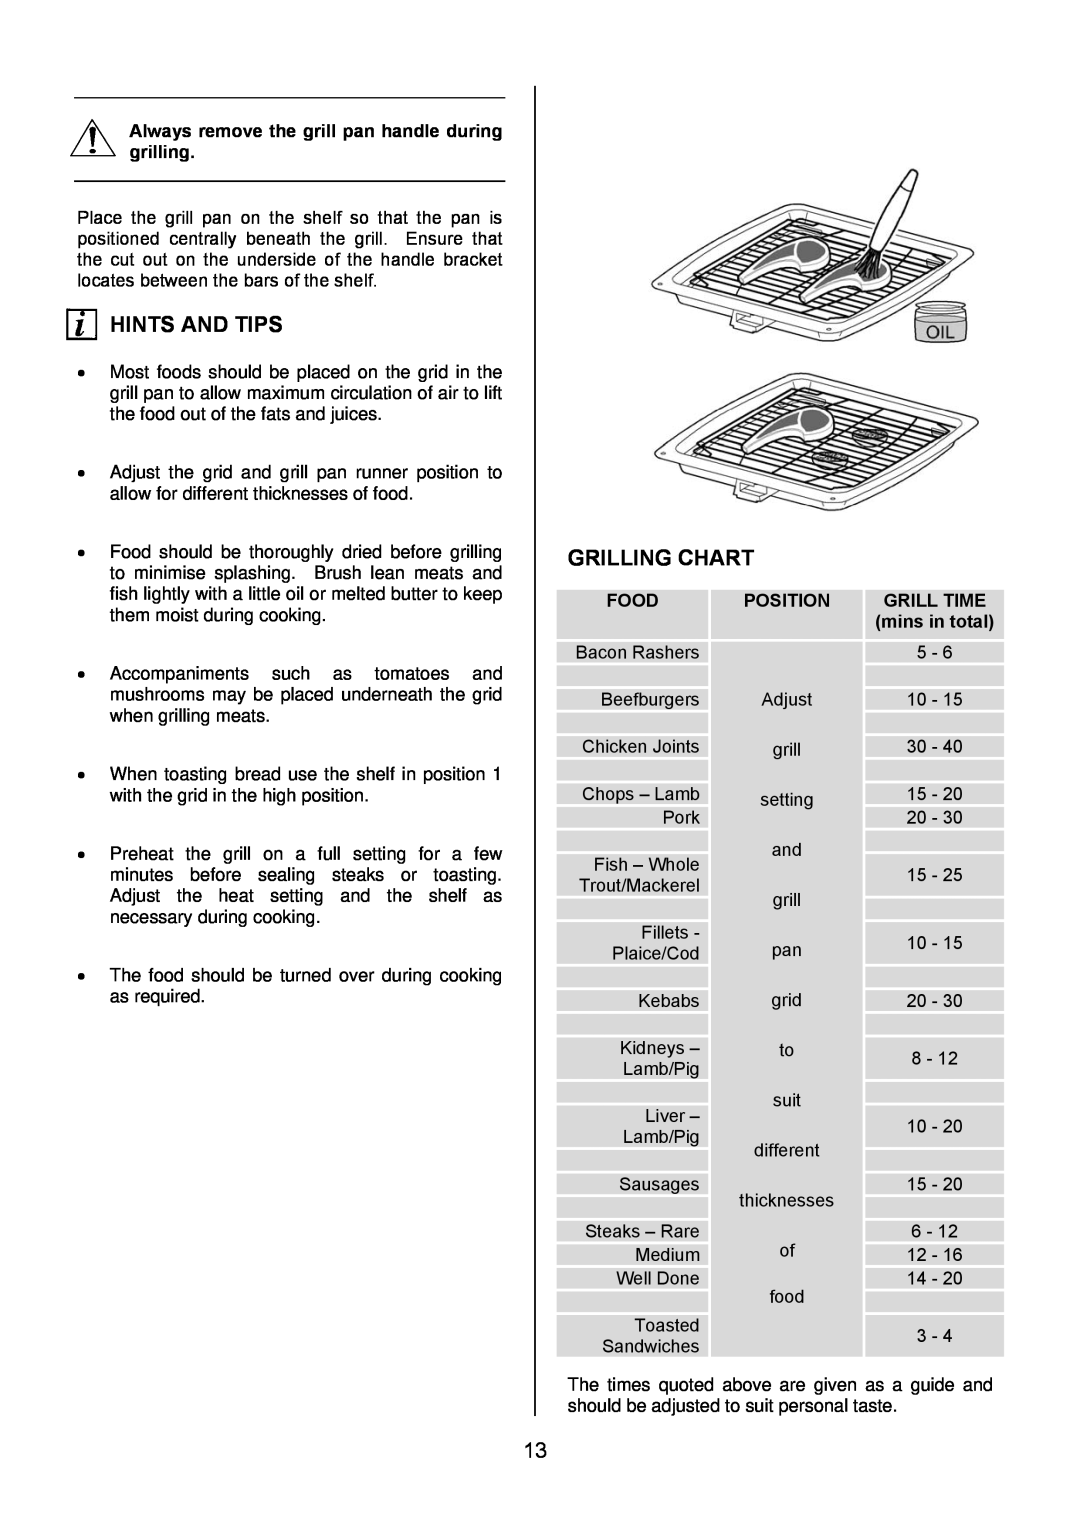 Electrolux EKG6046/EKG6047 manual Grilling Chart, Hints And Tips, Always remove the grill pan handle during grilling 